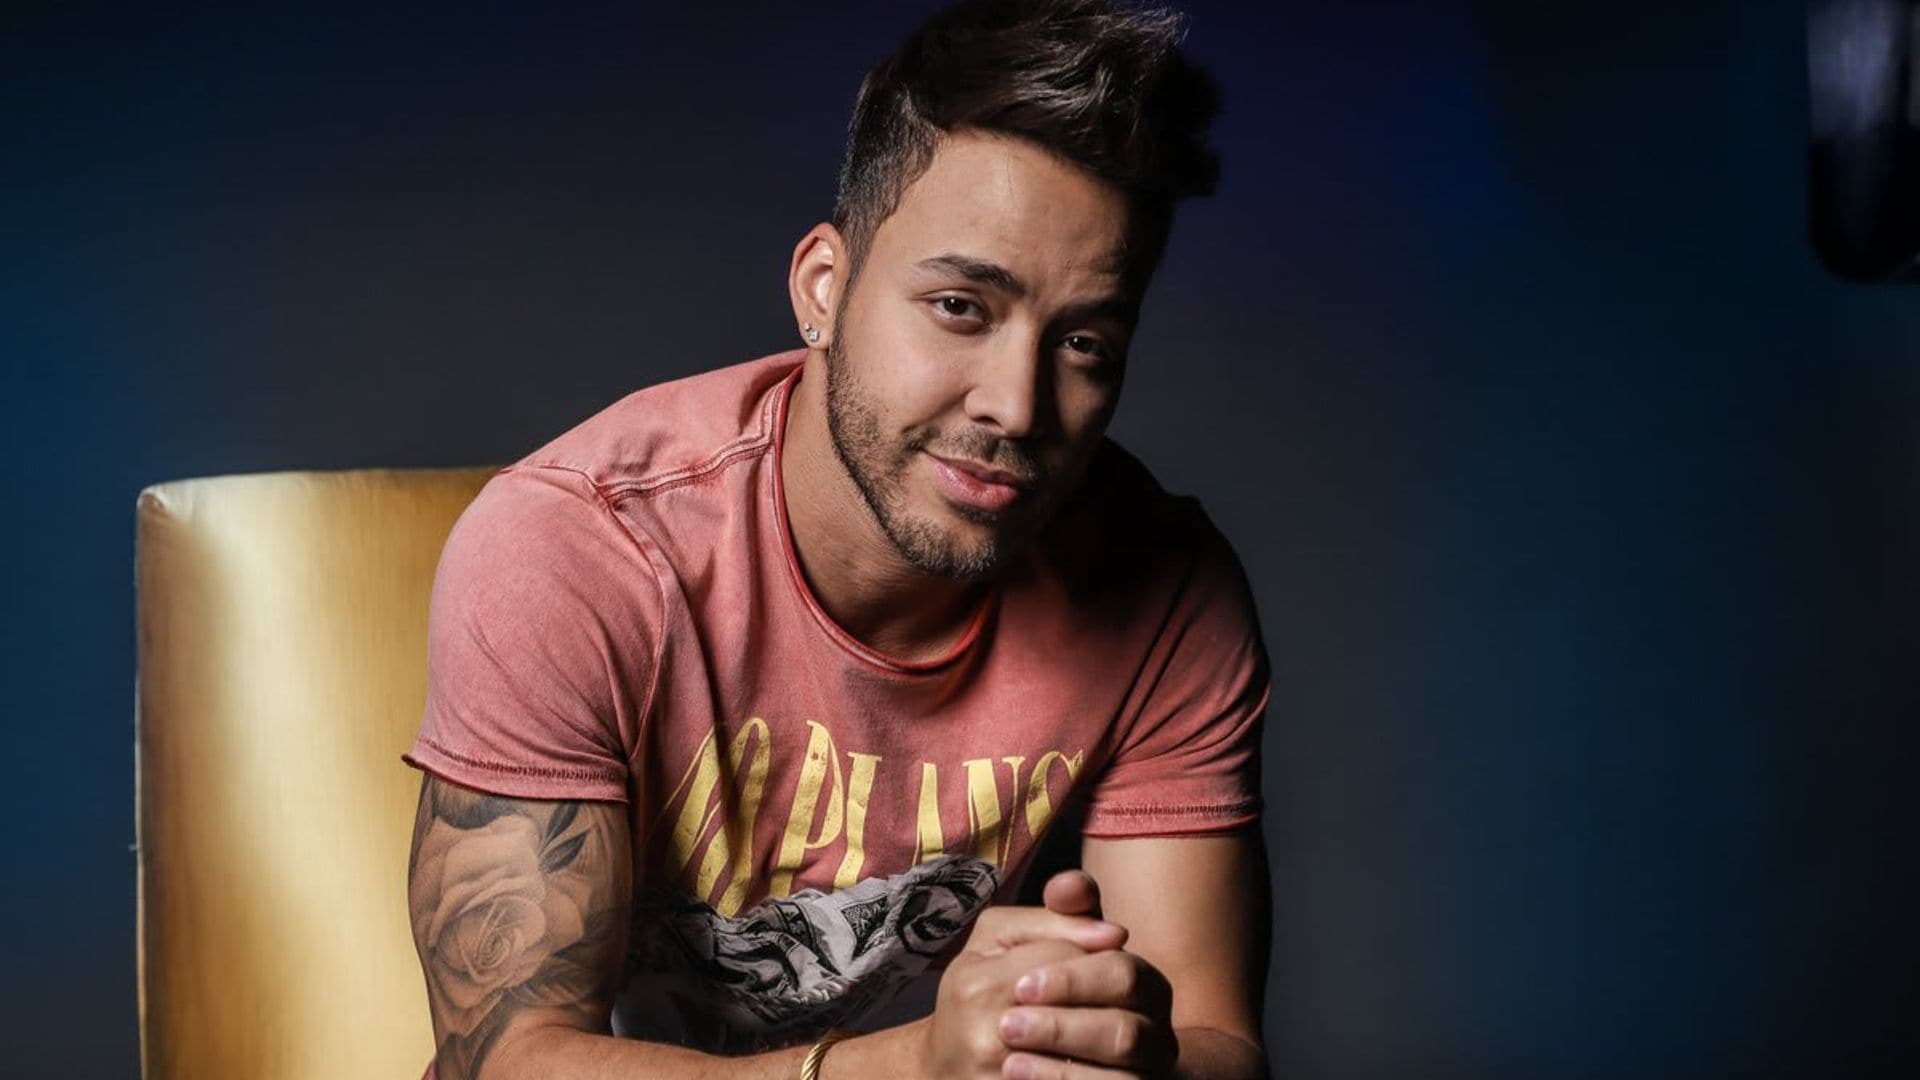 Prince Royce portrait shoot during his visit to La Musica Studio on February 05, 2020 in Miami, Florida.